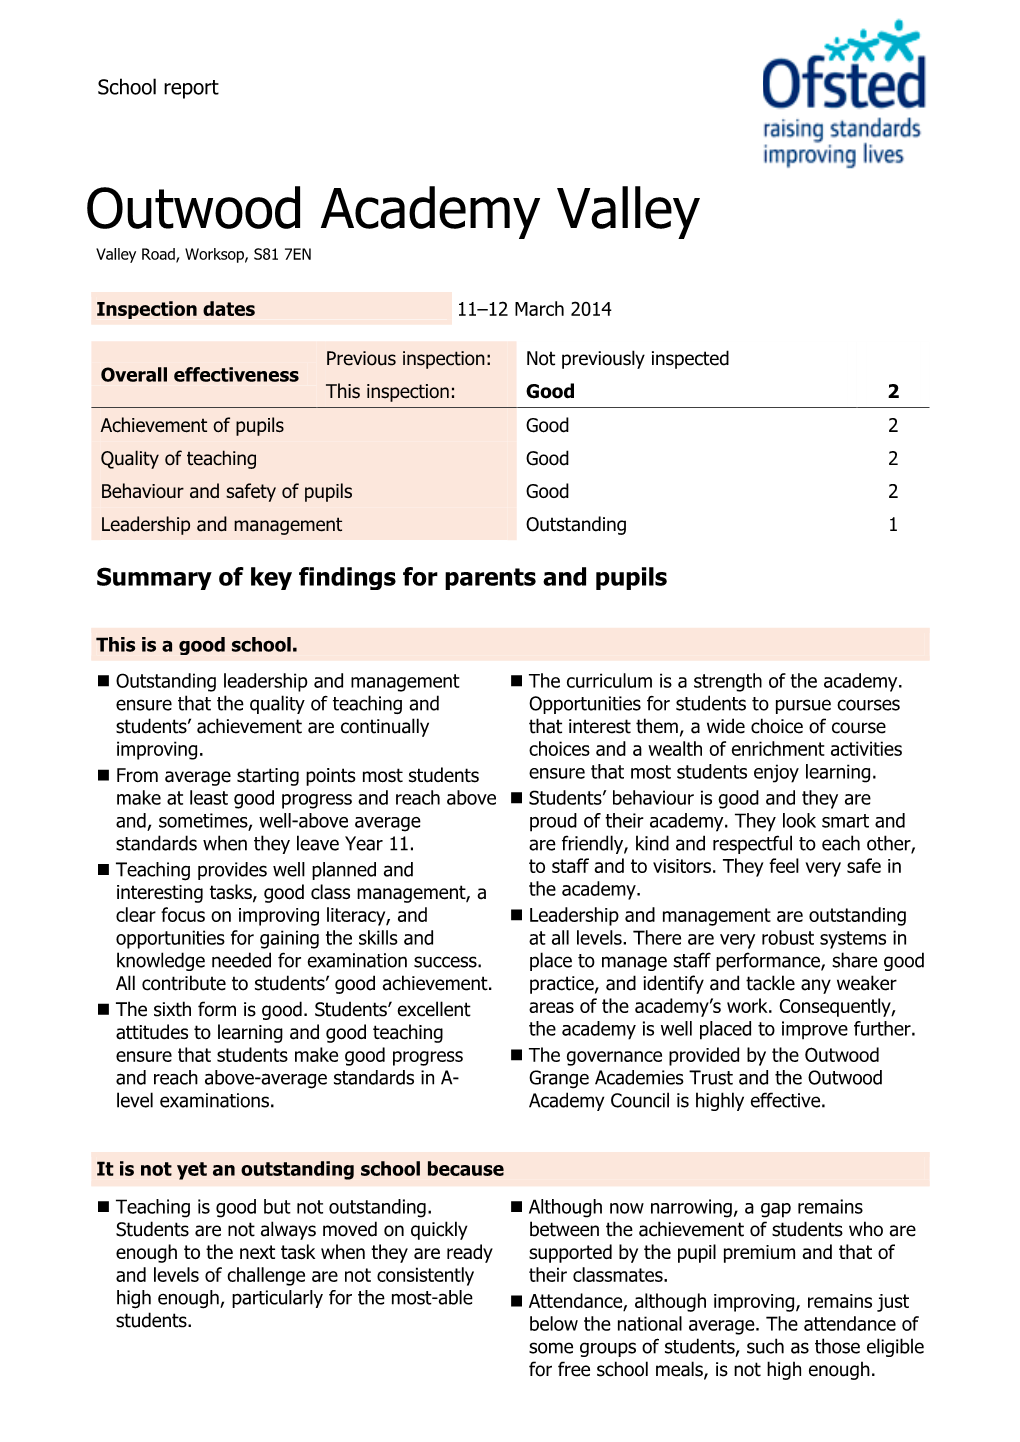 Outwood Academy Valley Valley Road, Worksop, S81 7EN